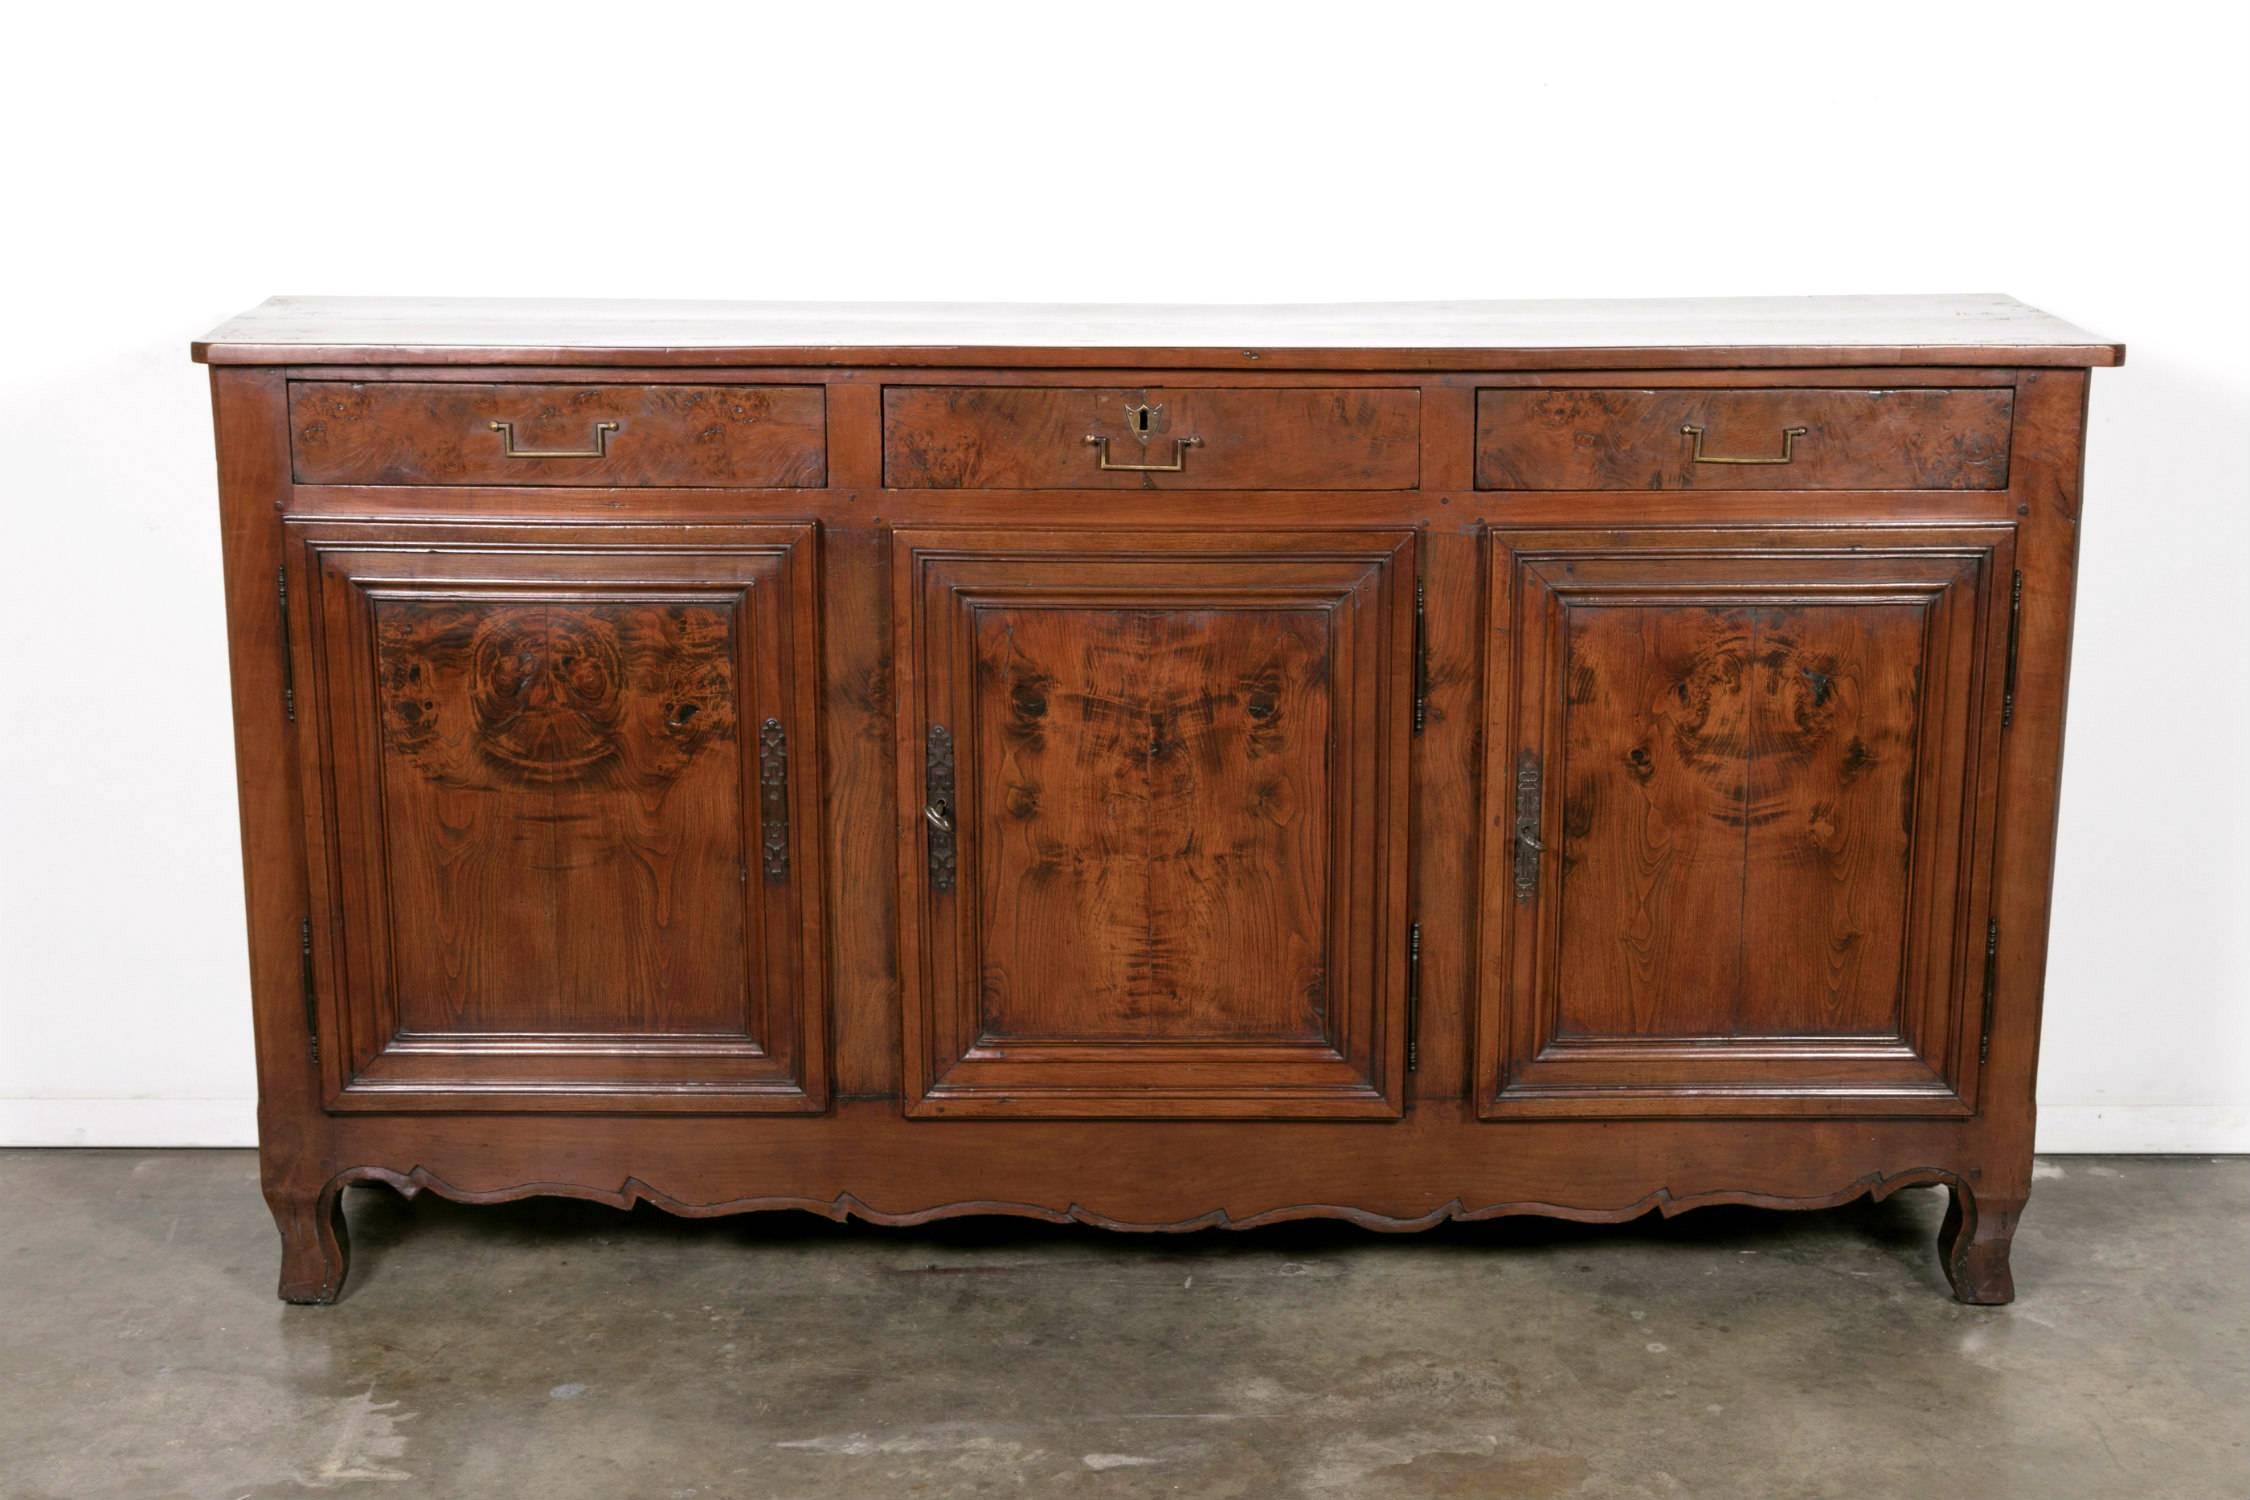 Handsome and rare 18th century cherry enfilade buffet with a burled chestnut bookmatched front having three drawers over three doors, handcrafted by skilled artisans from the Rhone-Alpes region during the French Transition period (1750-1775). Most